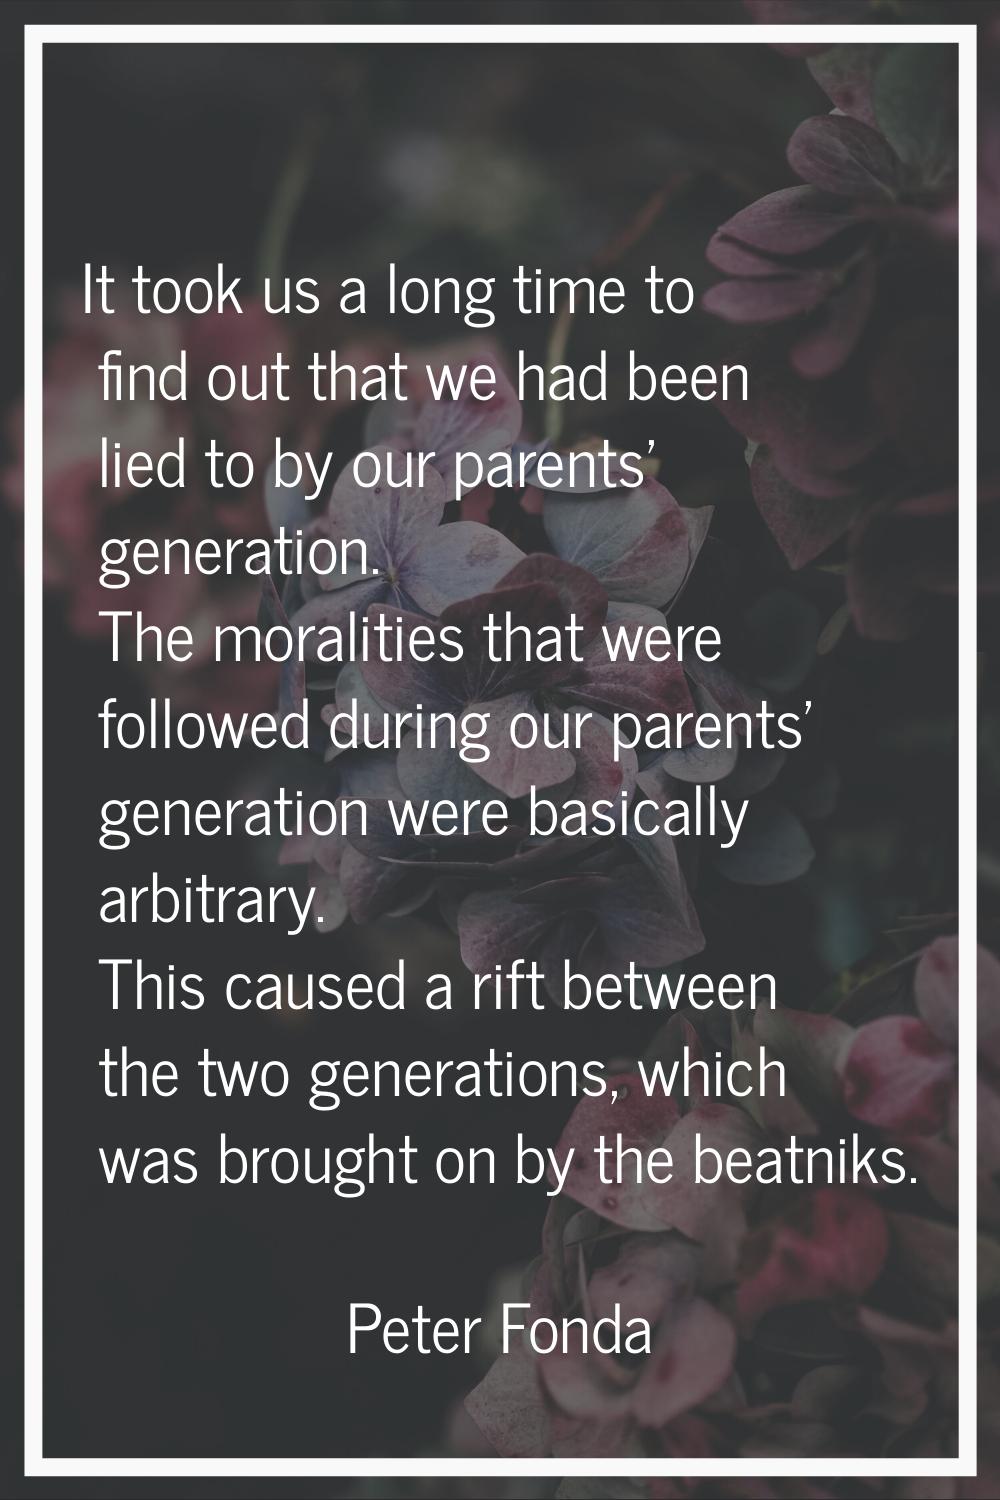 It took us a long time to find out that we had been lied to by our parents' generation. The moralit